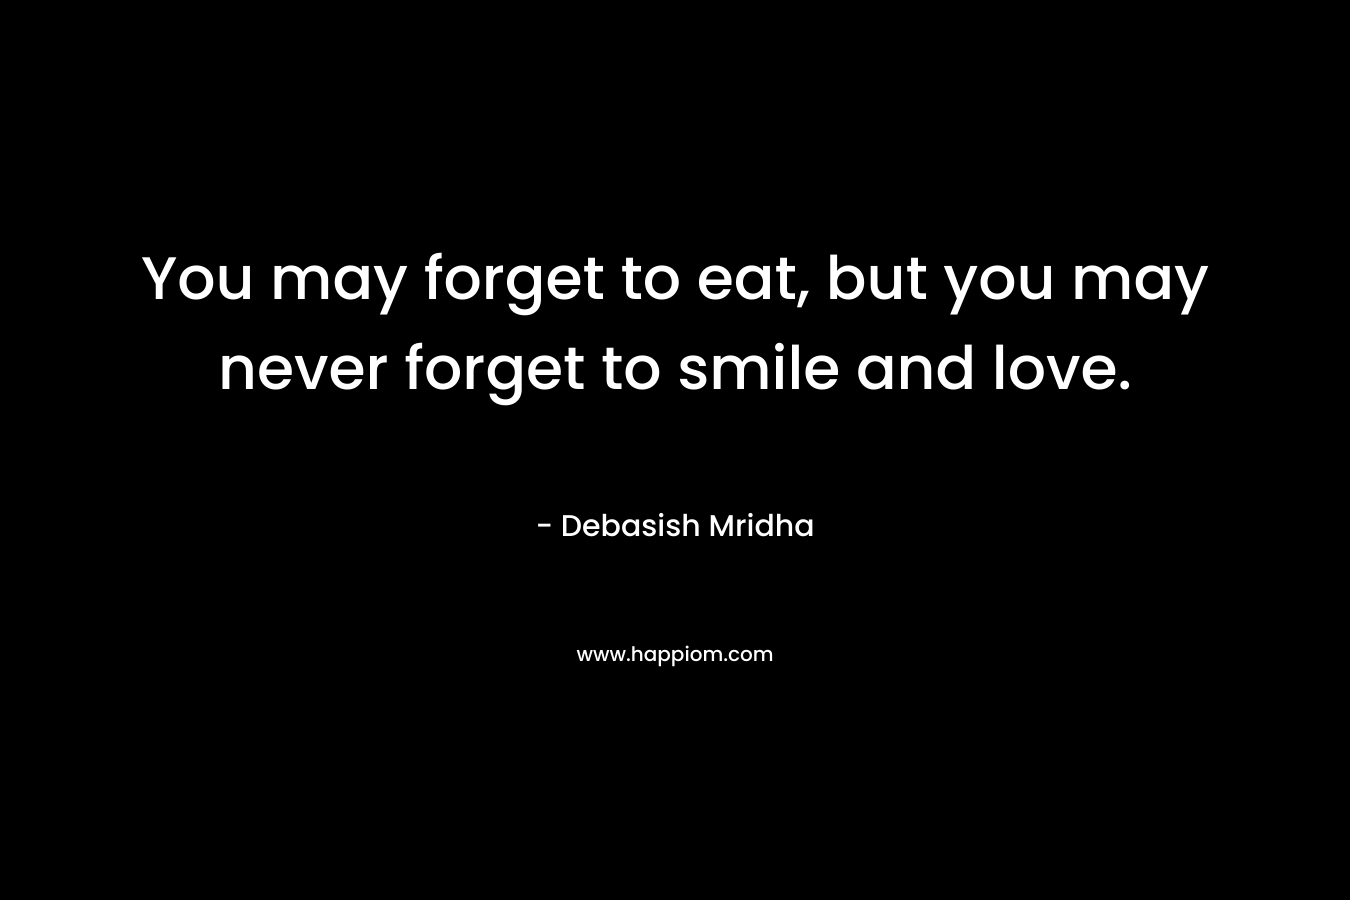 You may forget to eat, but you may never forget to smile and love.